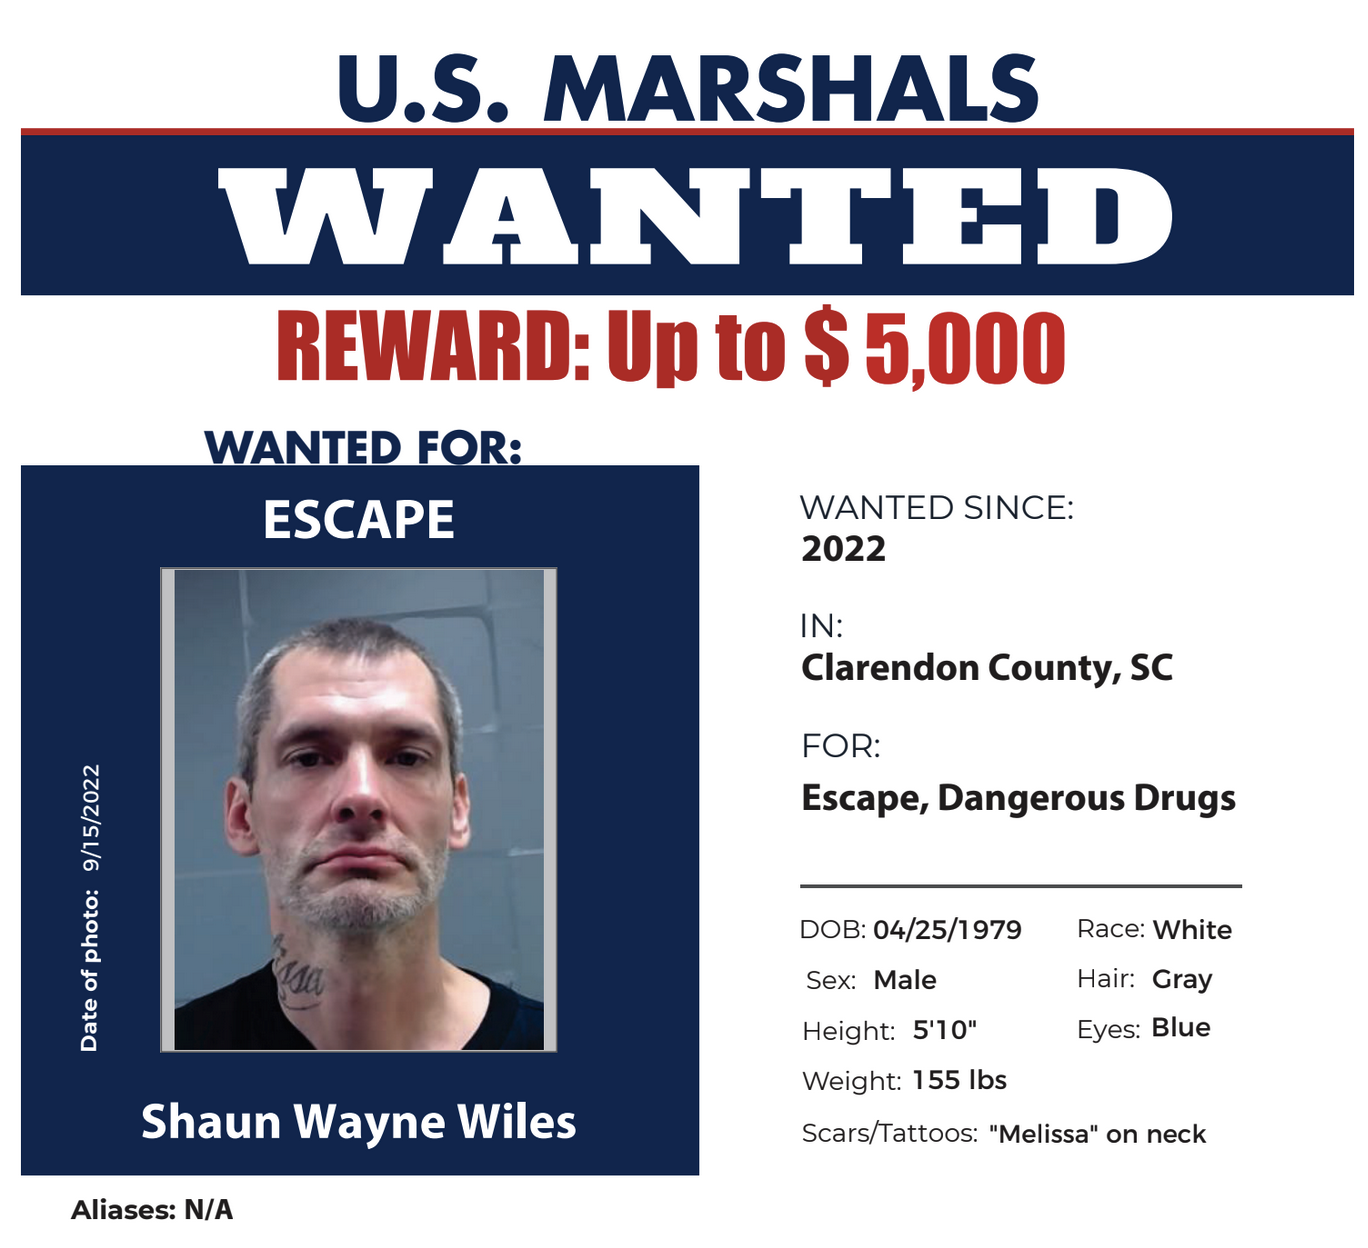 Deputies searching for escaped inmate in Clarendon County